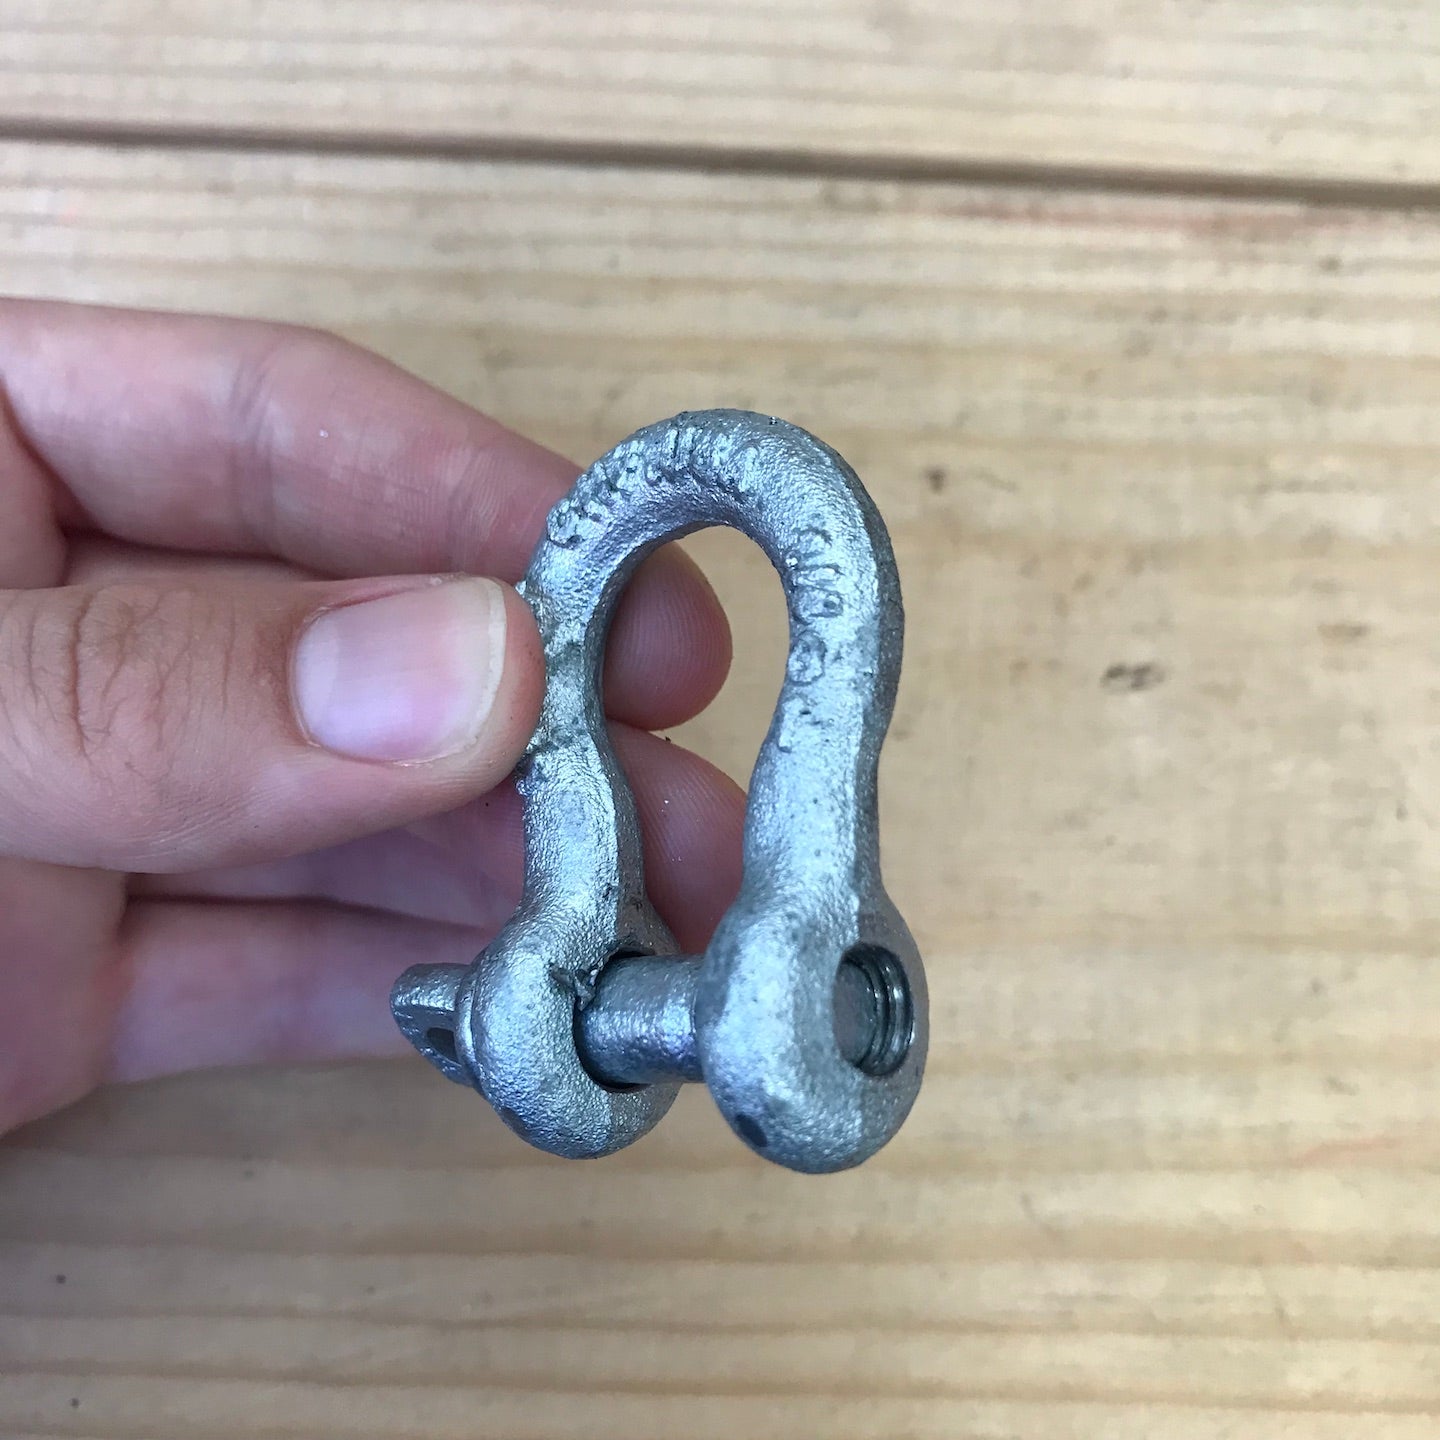 Chicago Hardware 1/4" Galvanized Anchor Screw Pin Shackle (20110-0)